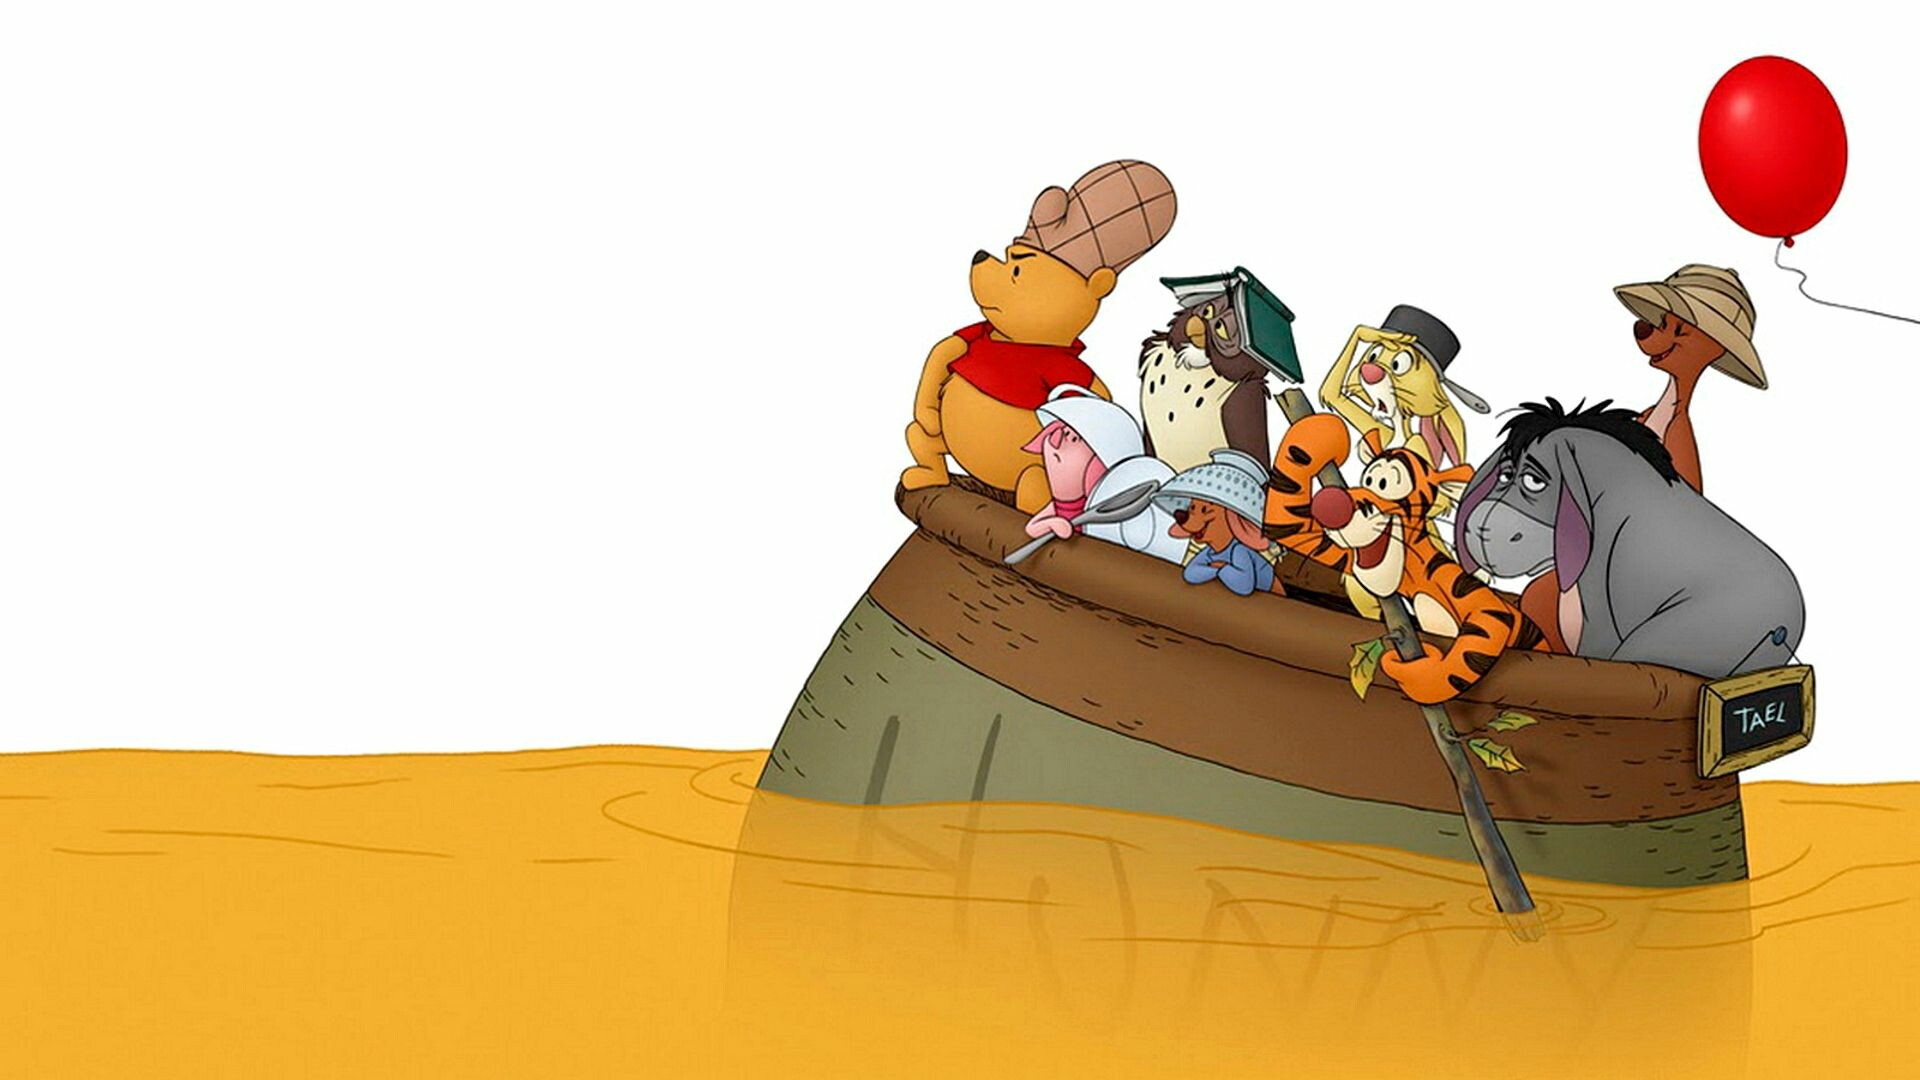 The Many Adventures of Winnie the Pooh: A bear of very little brain and all his friends in the Hundred Acre Wood sing their way through adventures, Animation. 1920x1080 Full HD Background.